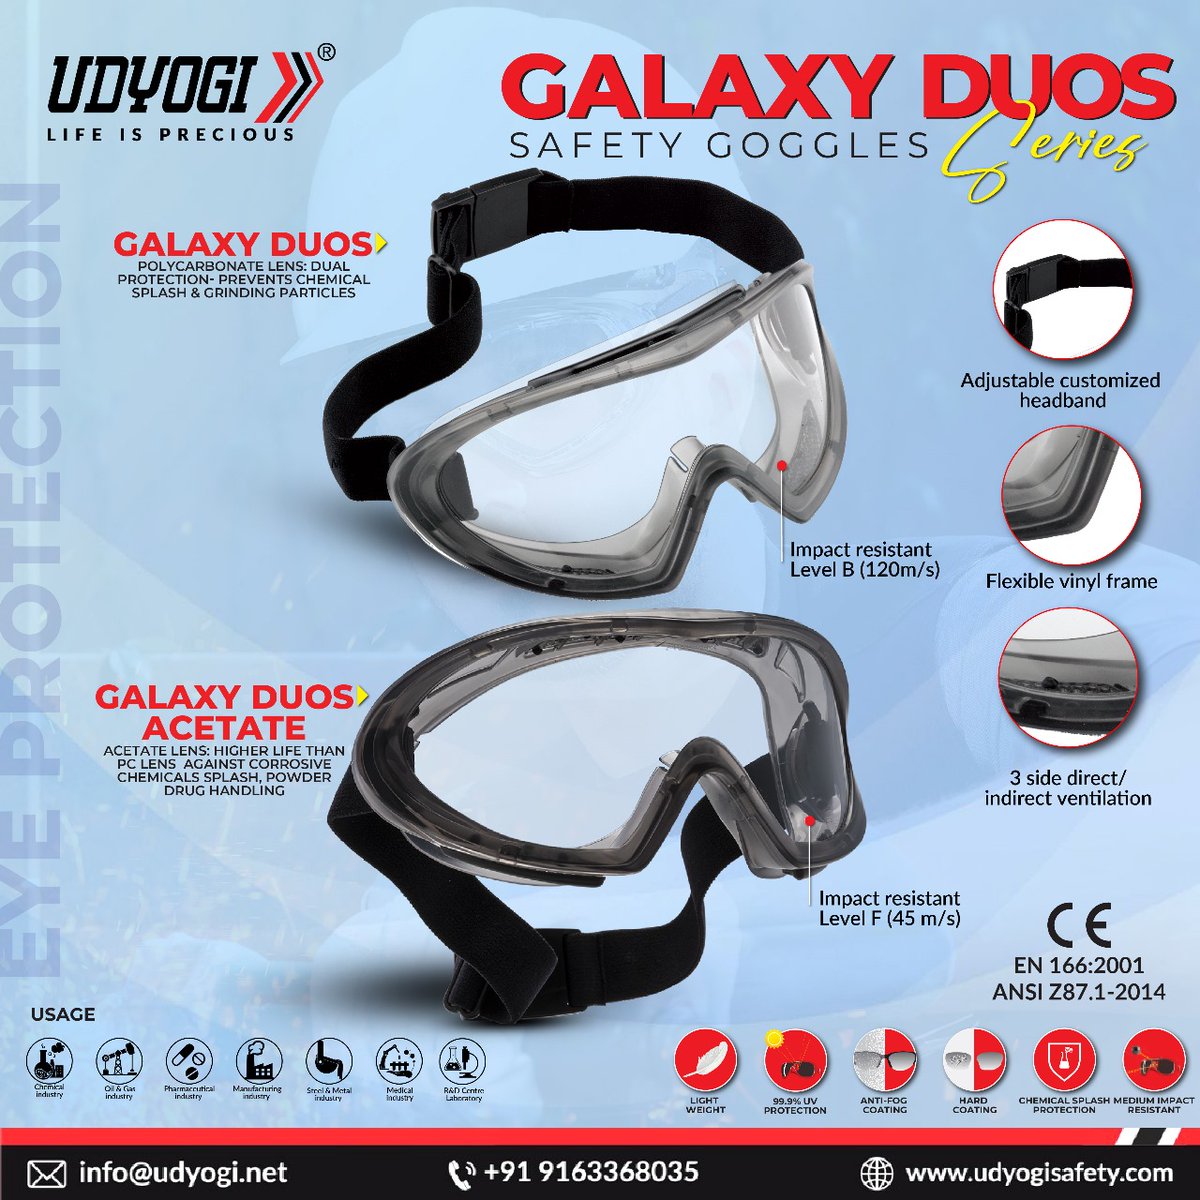 Say goodbye to compromises and hello to innovation with our latest Galaxy Duos goggles. Engineered for ultimate protection and comfort, these goggles are your shield against hazards while keeping you looking sharp on the job.
#Udyogi #EyeProtection #GalaxyDuos #safetyatwork